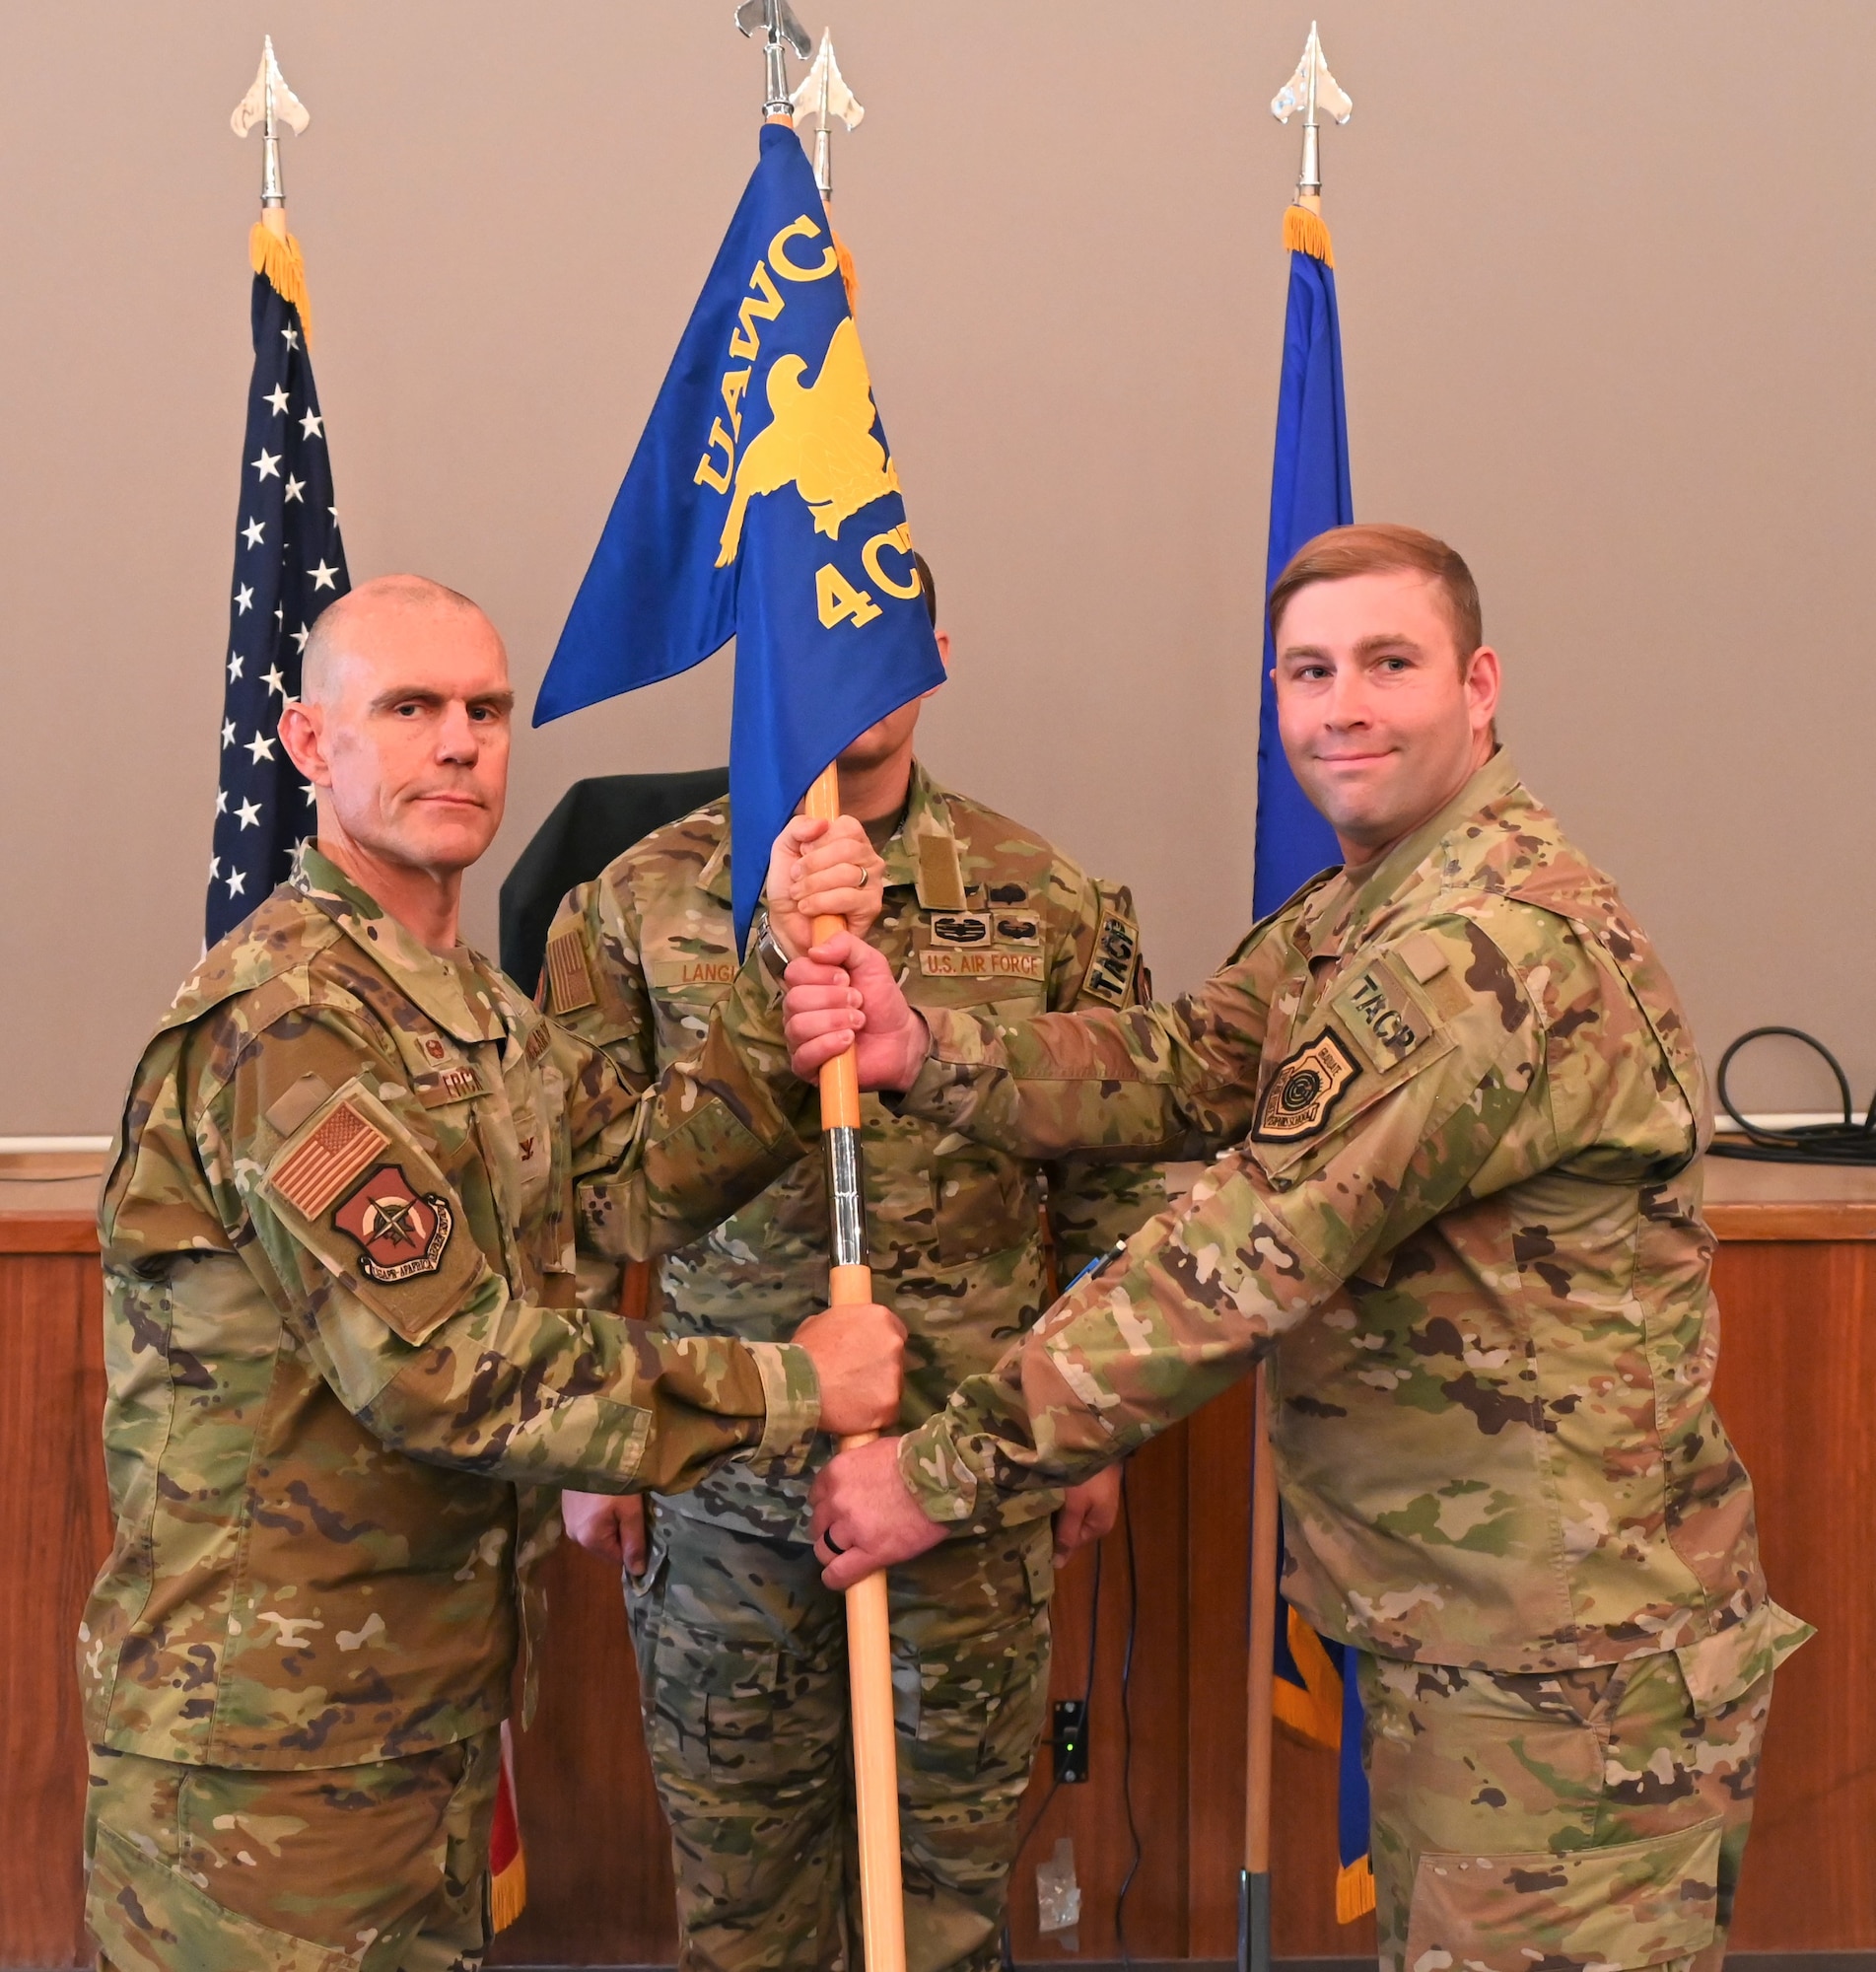 U.S. Air Force Col. Dean Berck, left, United States Air Forces in Europe and Air Forces Africa Warfare Center Commander, presents the guidon to Lt. Col. Shawn Elliott, right, 4th Combat Training Squadron incoming commander, at Einsiedlerhof Military Complex, Germany, June 15, 2023.